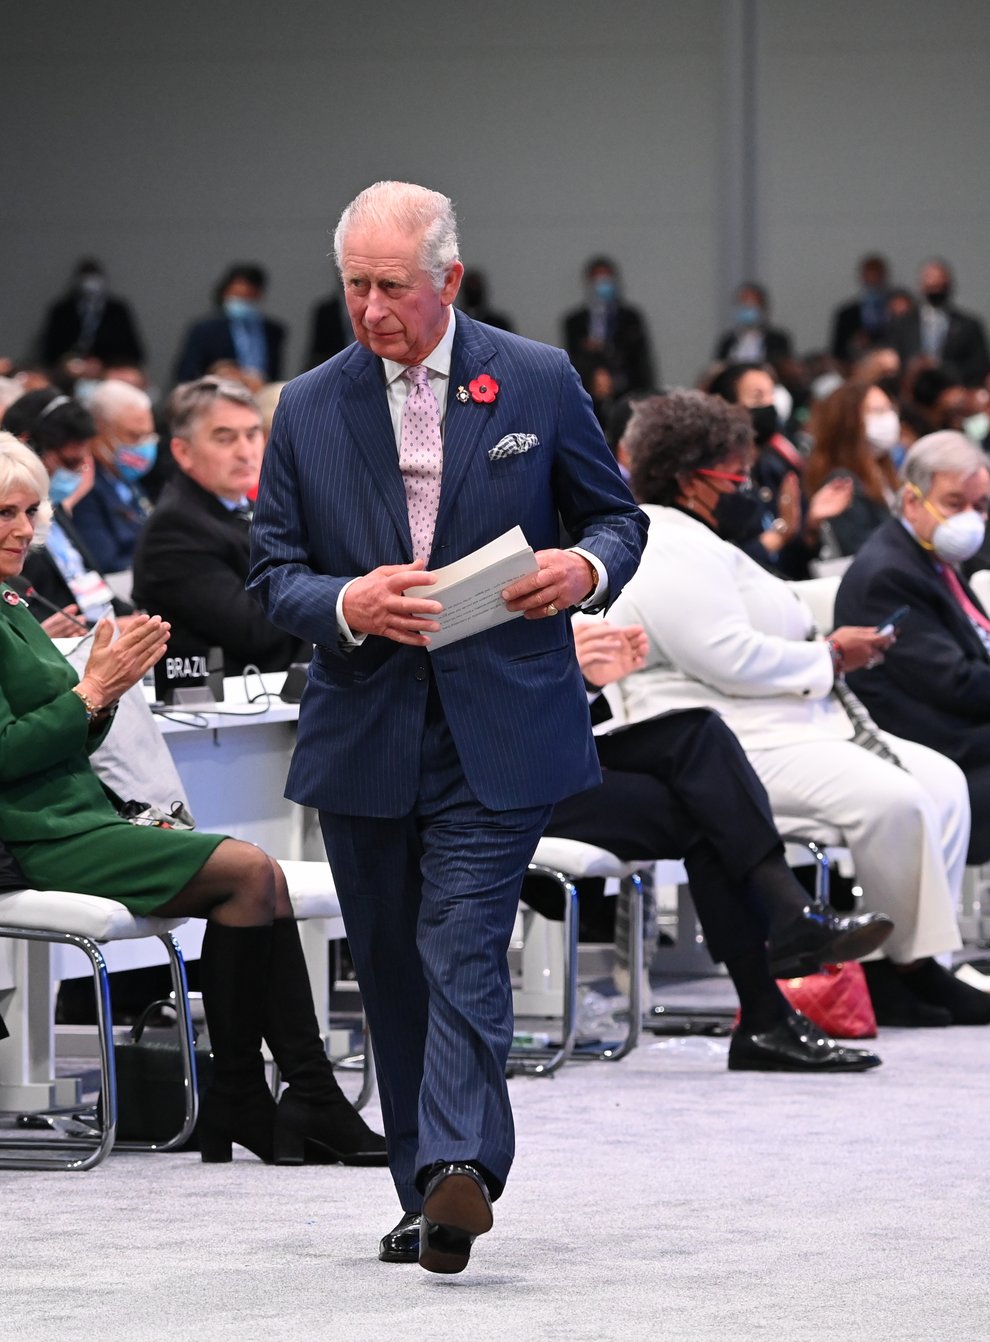 The Prince of Wales before speaking during the opening ceremony for the Cop26 summit at the Scottish Event Campus (SEC) in Glasgow (Jeff J Mitchell/PA)